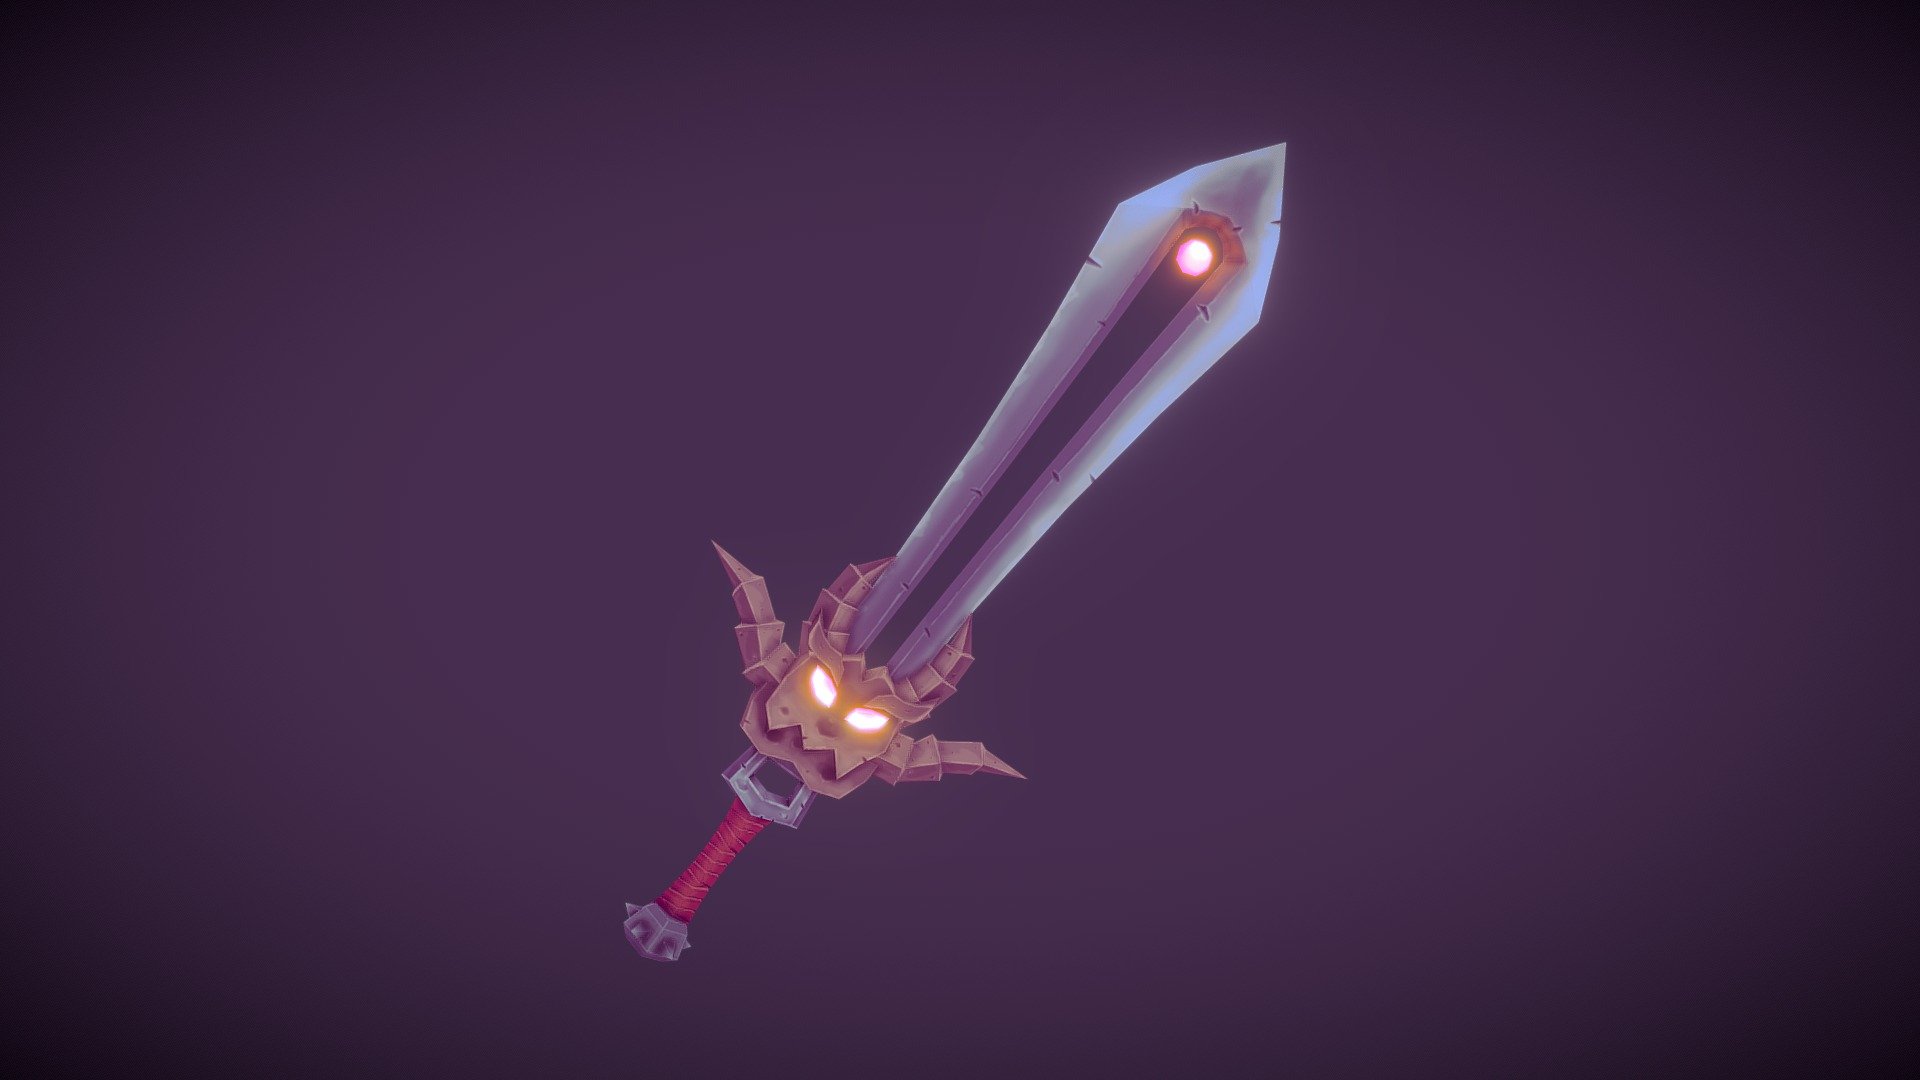 A sword for Illysia, a VRMMORPG in development!

&ldquo;Around the year XXXX, ancient times, there was a demon who sought to rule over both man and beast. In an act of balance by nature, a single hero stood against this demon and overthrew his tyrannical rule. Before the demon was vanquished, he cursed the hero and his bloodline. It is said that every thousand years, the first born of this man's bloodline will be corrupted by the spirit of the demon and will take up this blade and attempt to revive the demon to it's full power